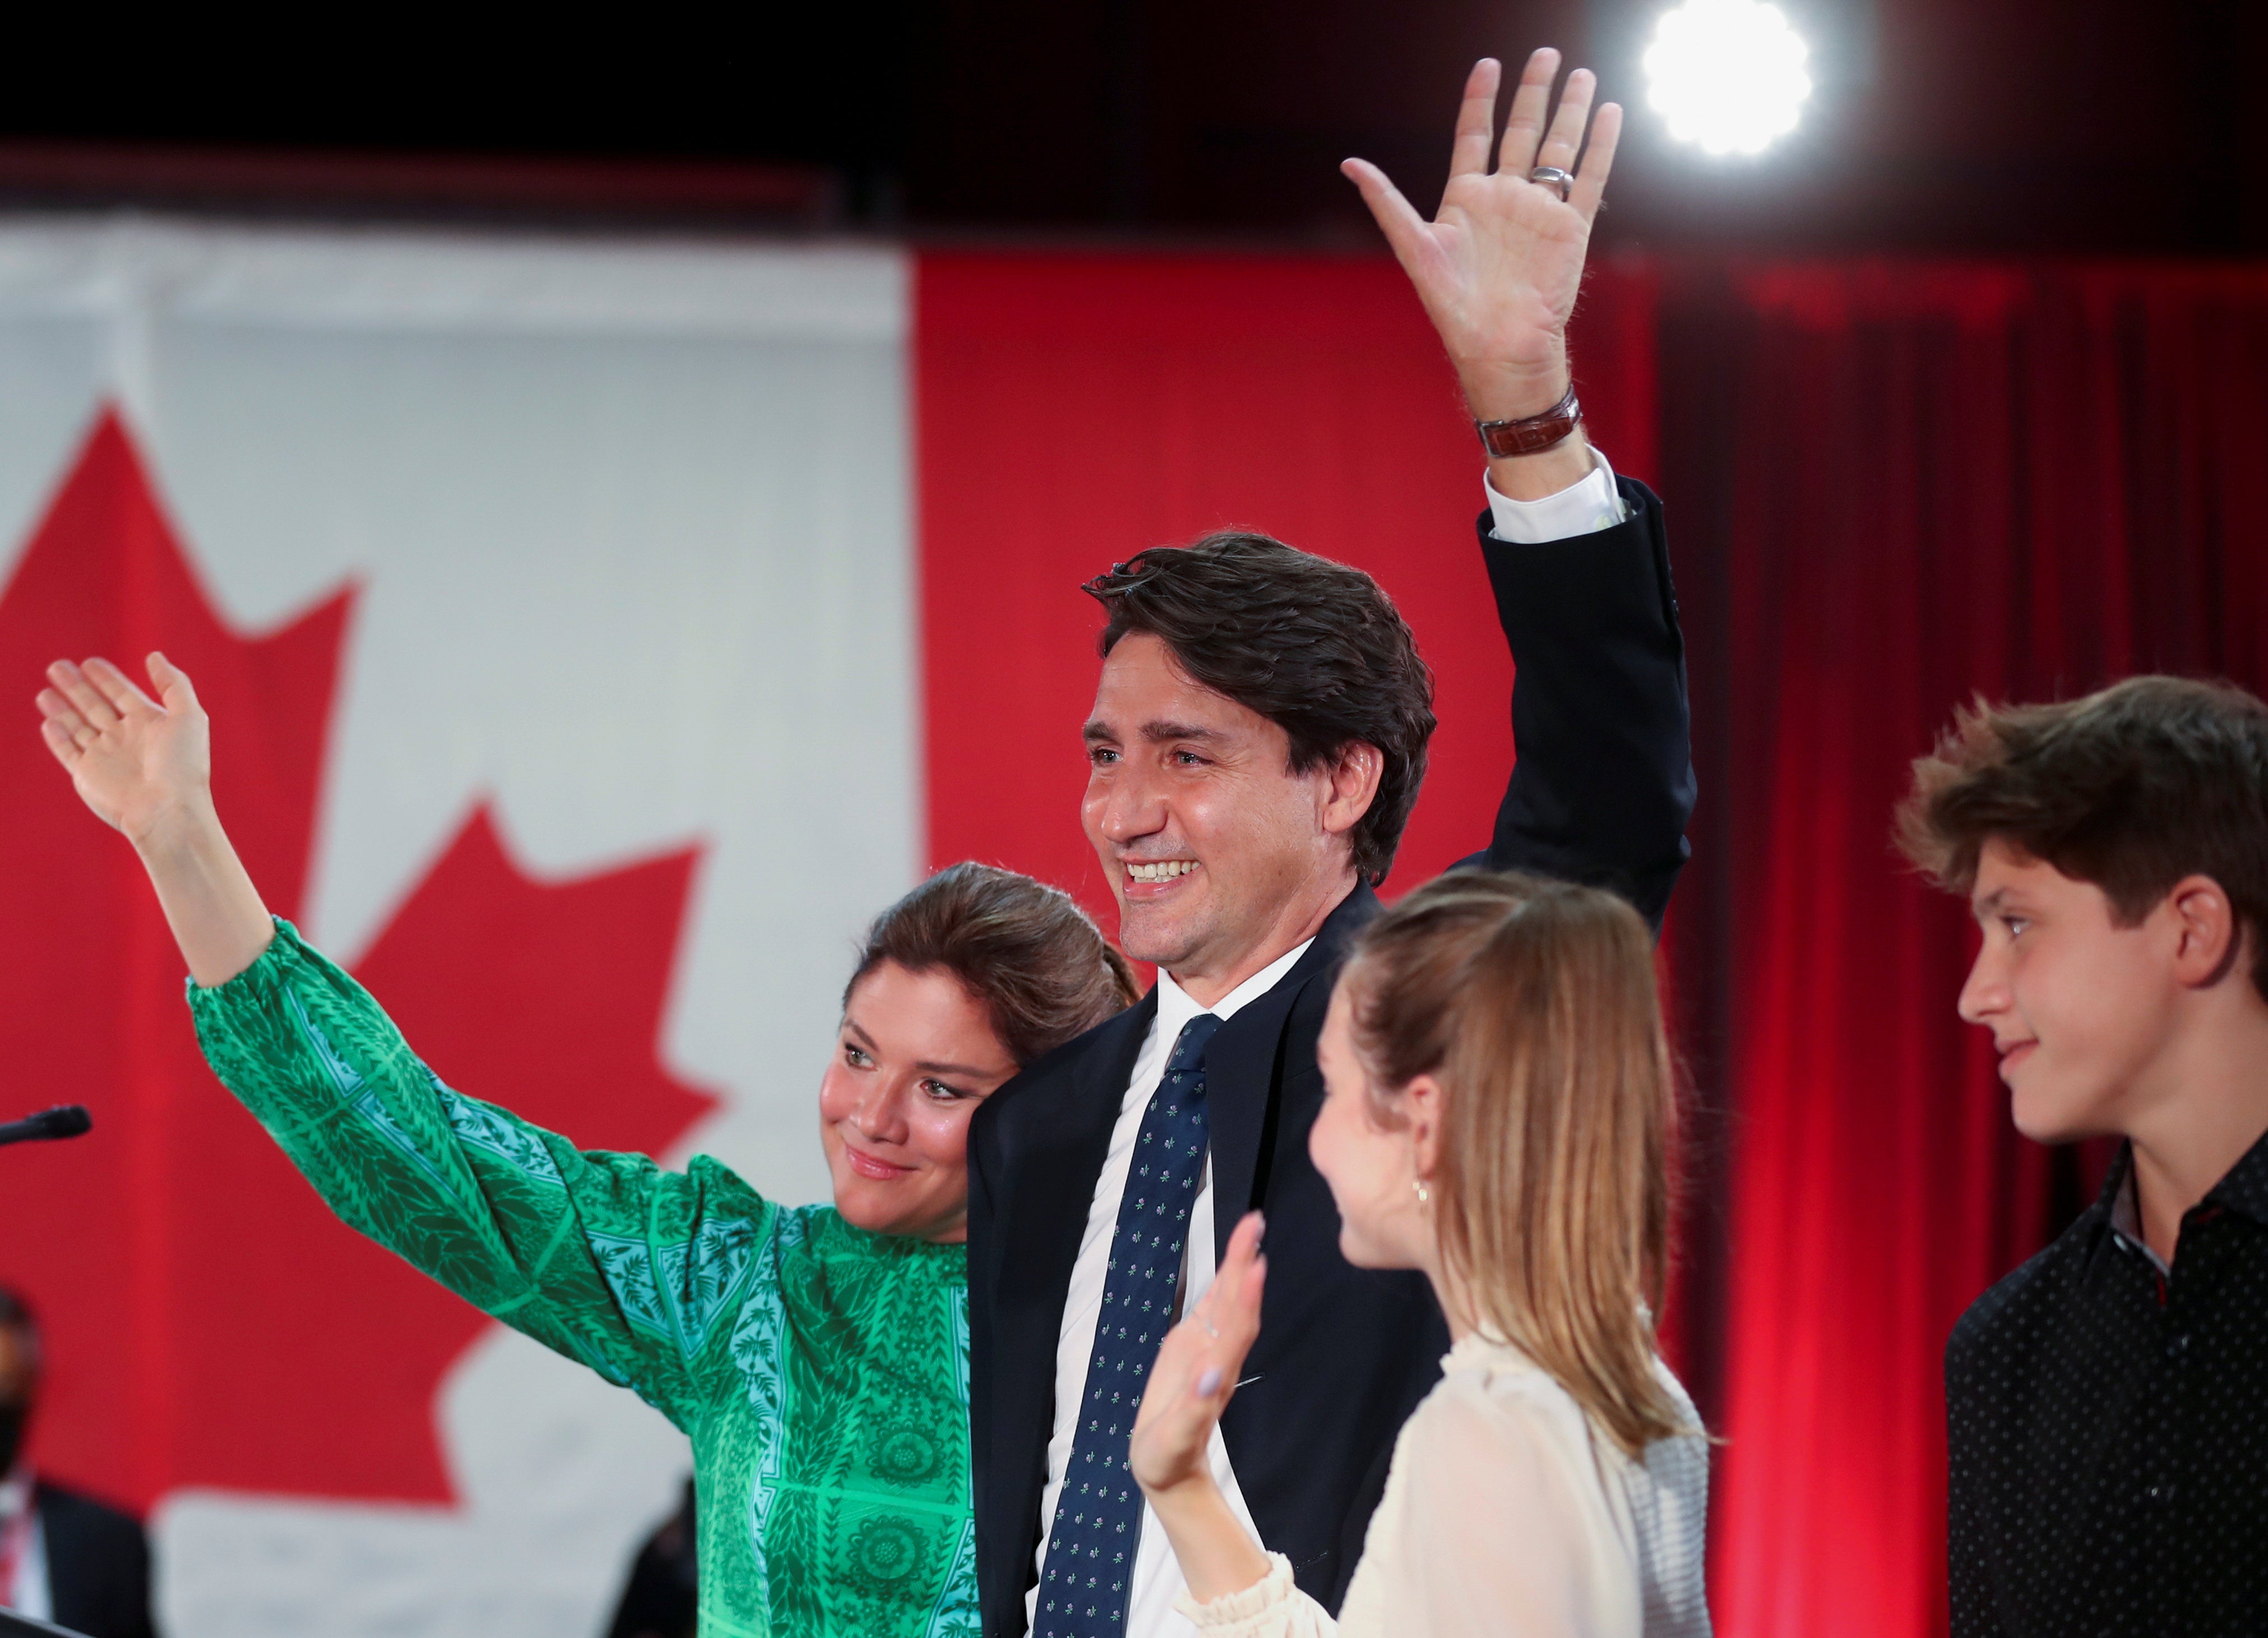 Canada’s Liberal prime minister Justin Trudeau, accompanied by his wife Sophie Gregoire and their children at an election night party in Montreal